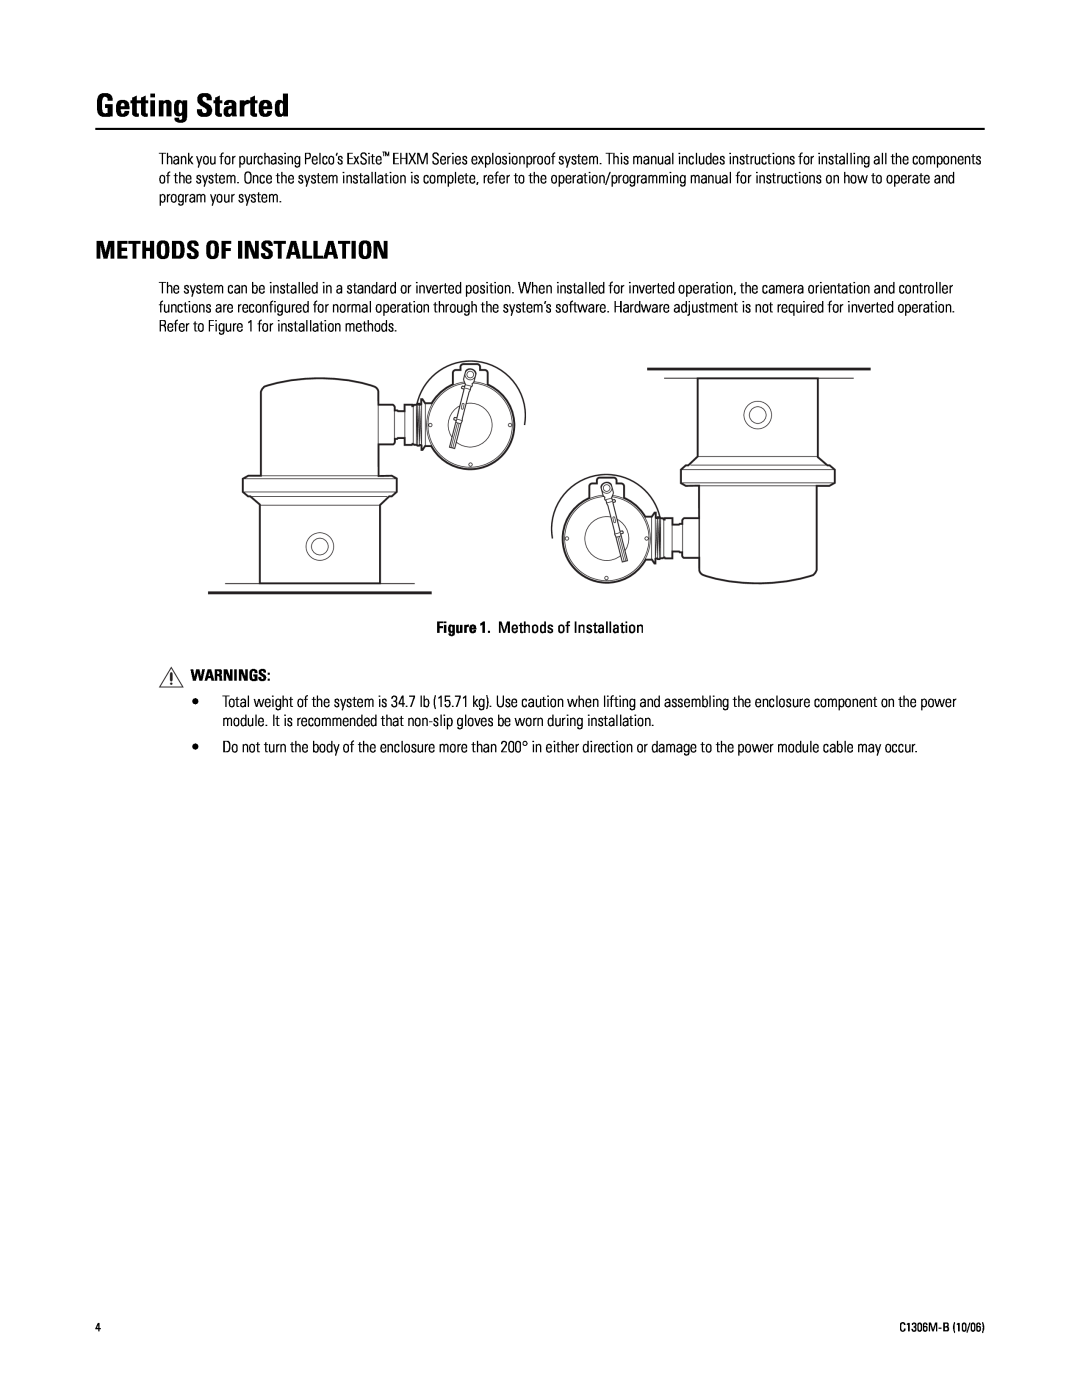 Pelco 2 C1306M-B (10/06) manual Getting Started, Methods Of Installation, Warnings 